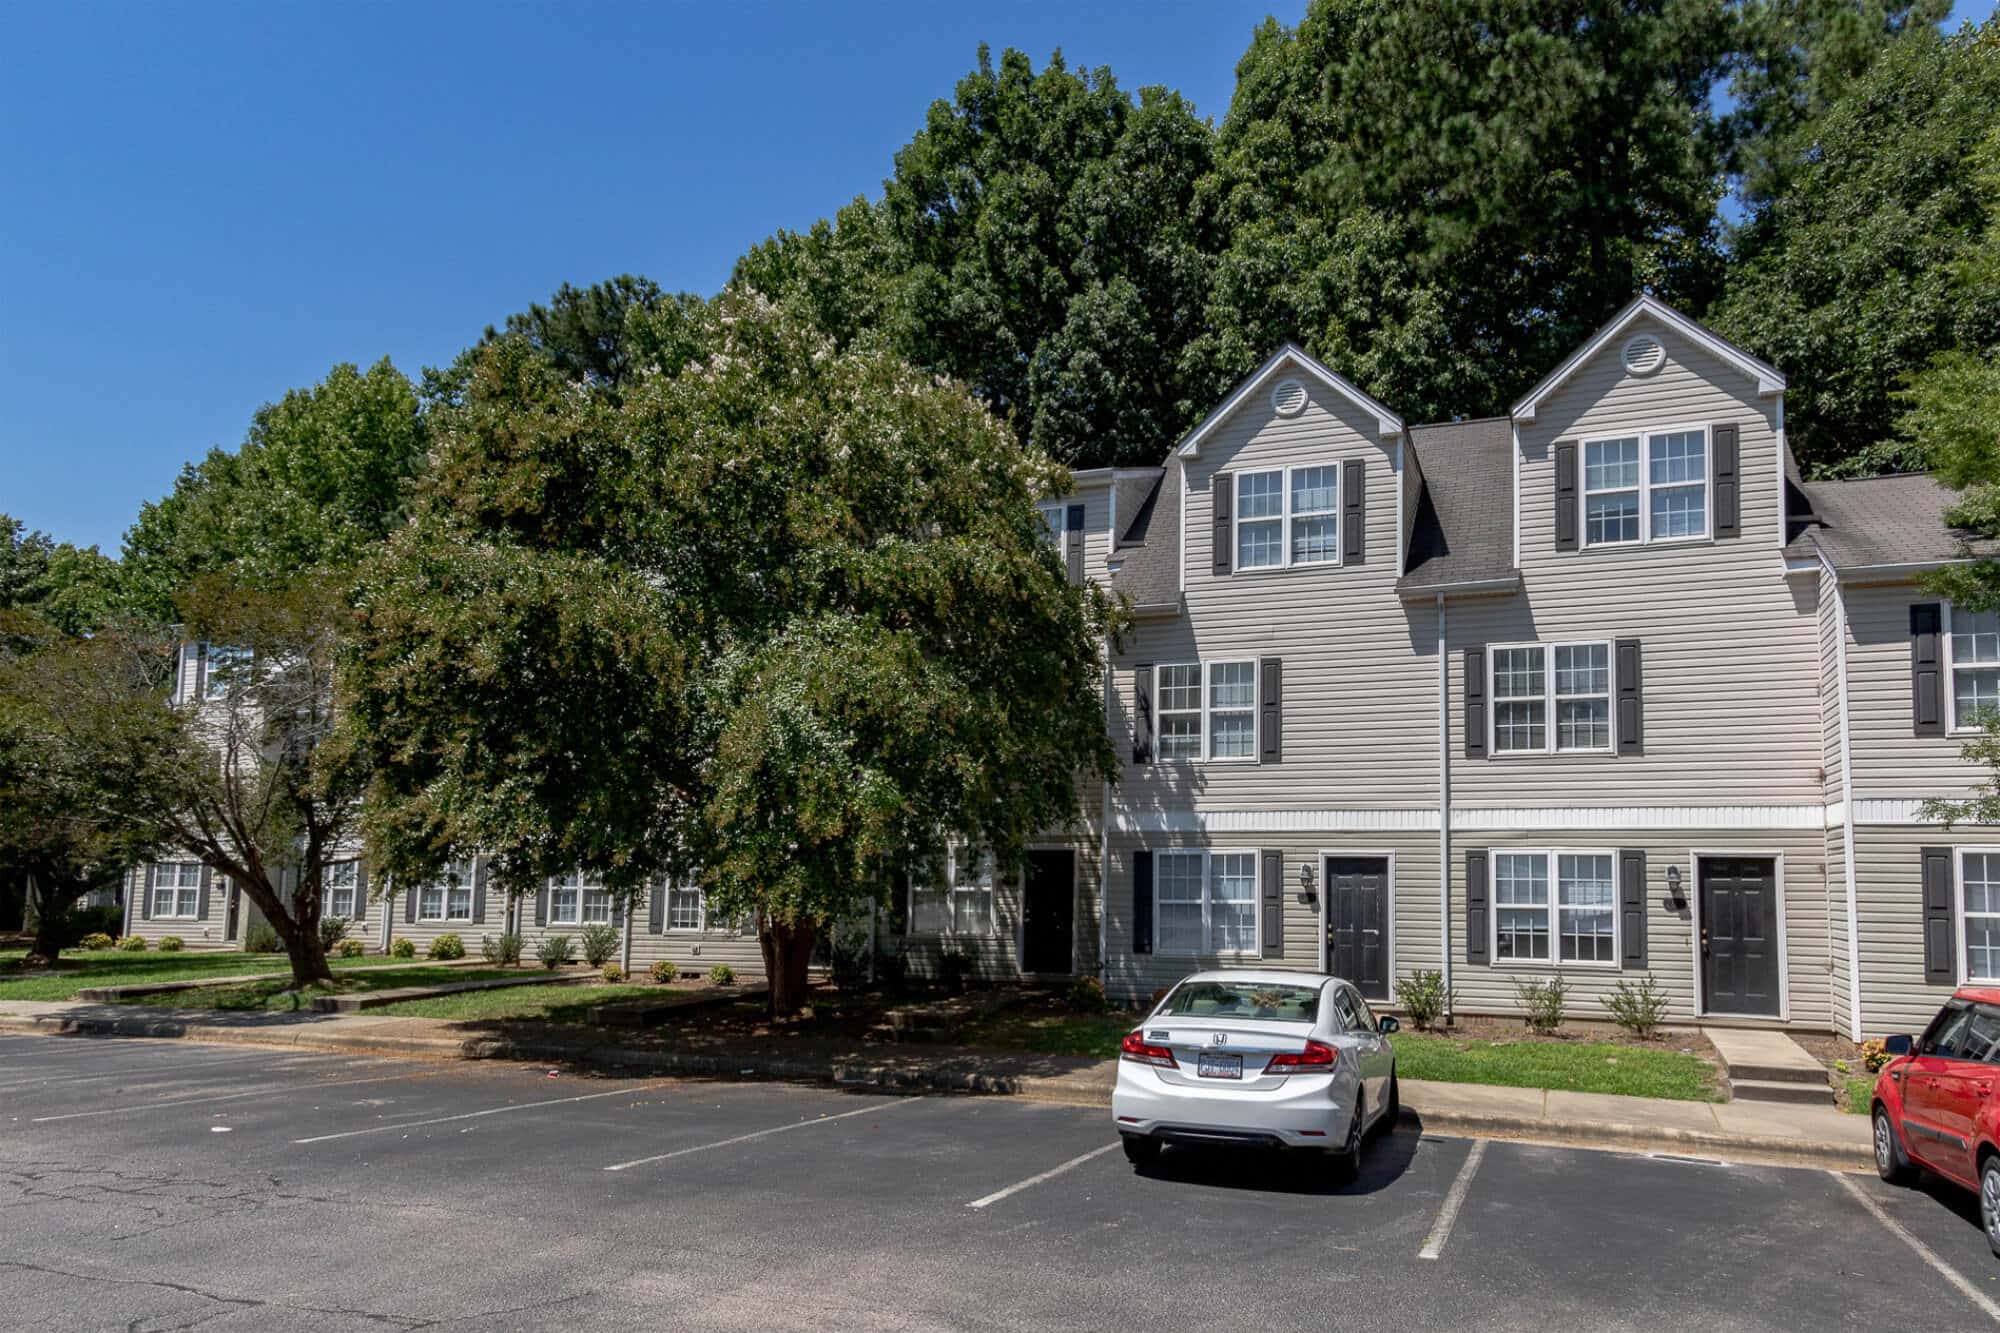 raleigh off campus method townhomes off campus apartments near nc state university raleigh north carolina community building exterior resident parking spaces